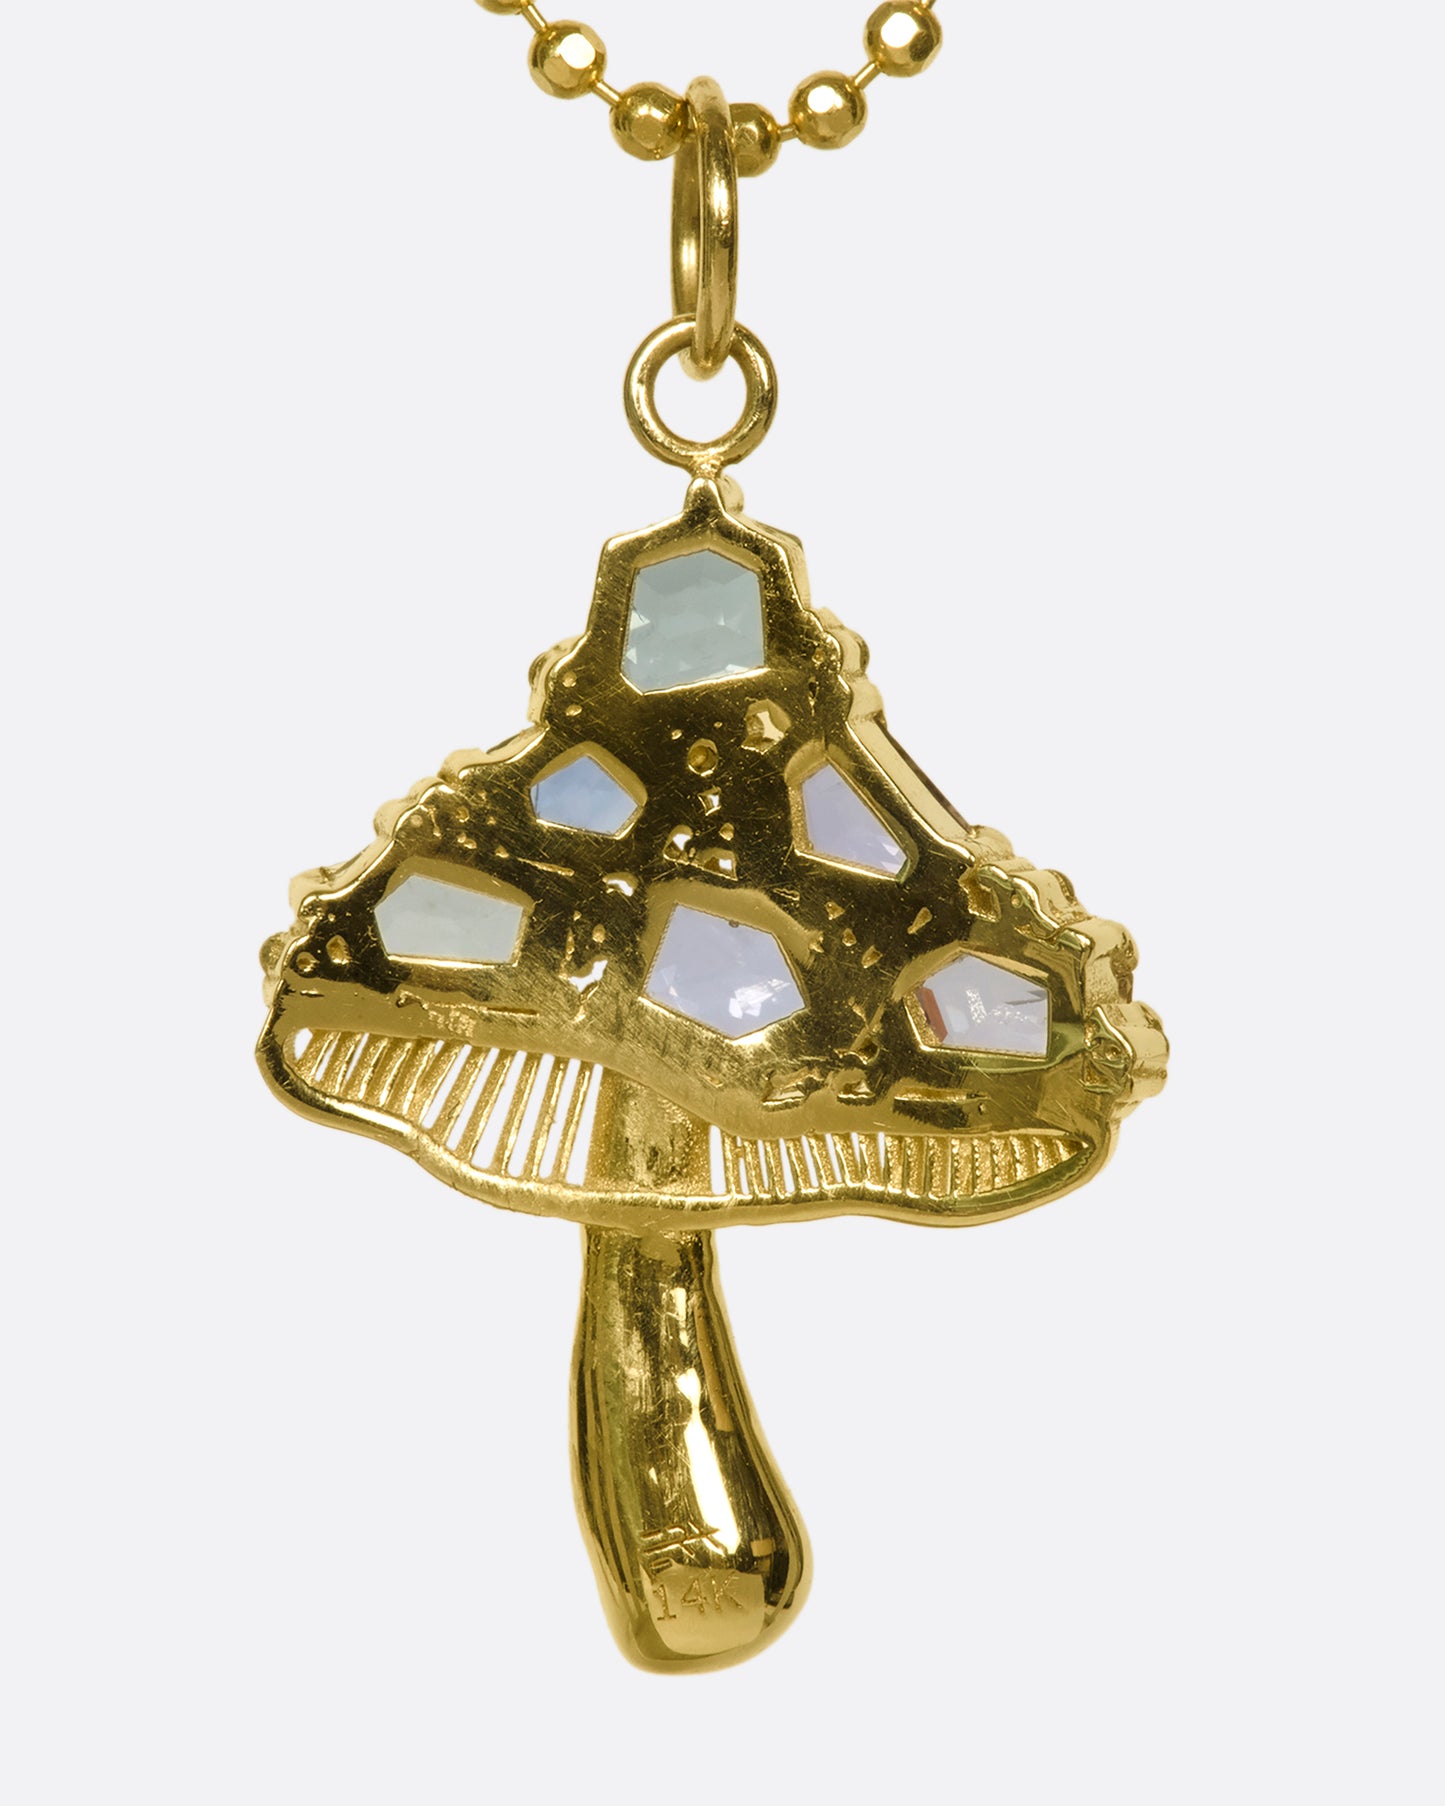 A faceted cut ball chain that refracts light, creating a sparkly look, with a 14K gold mushroom pendant